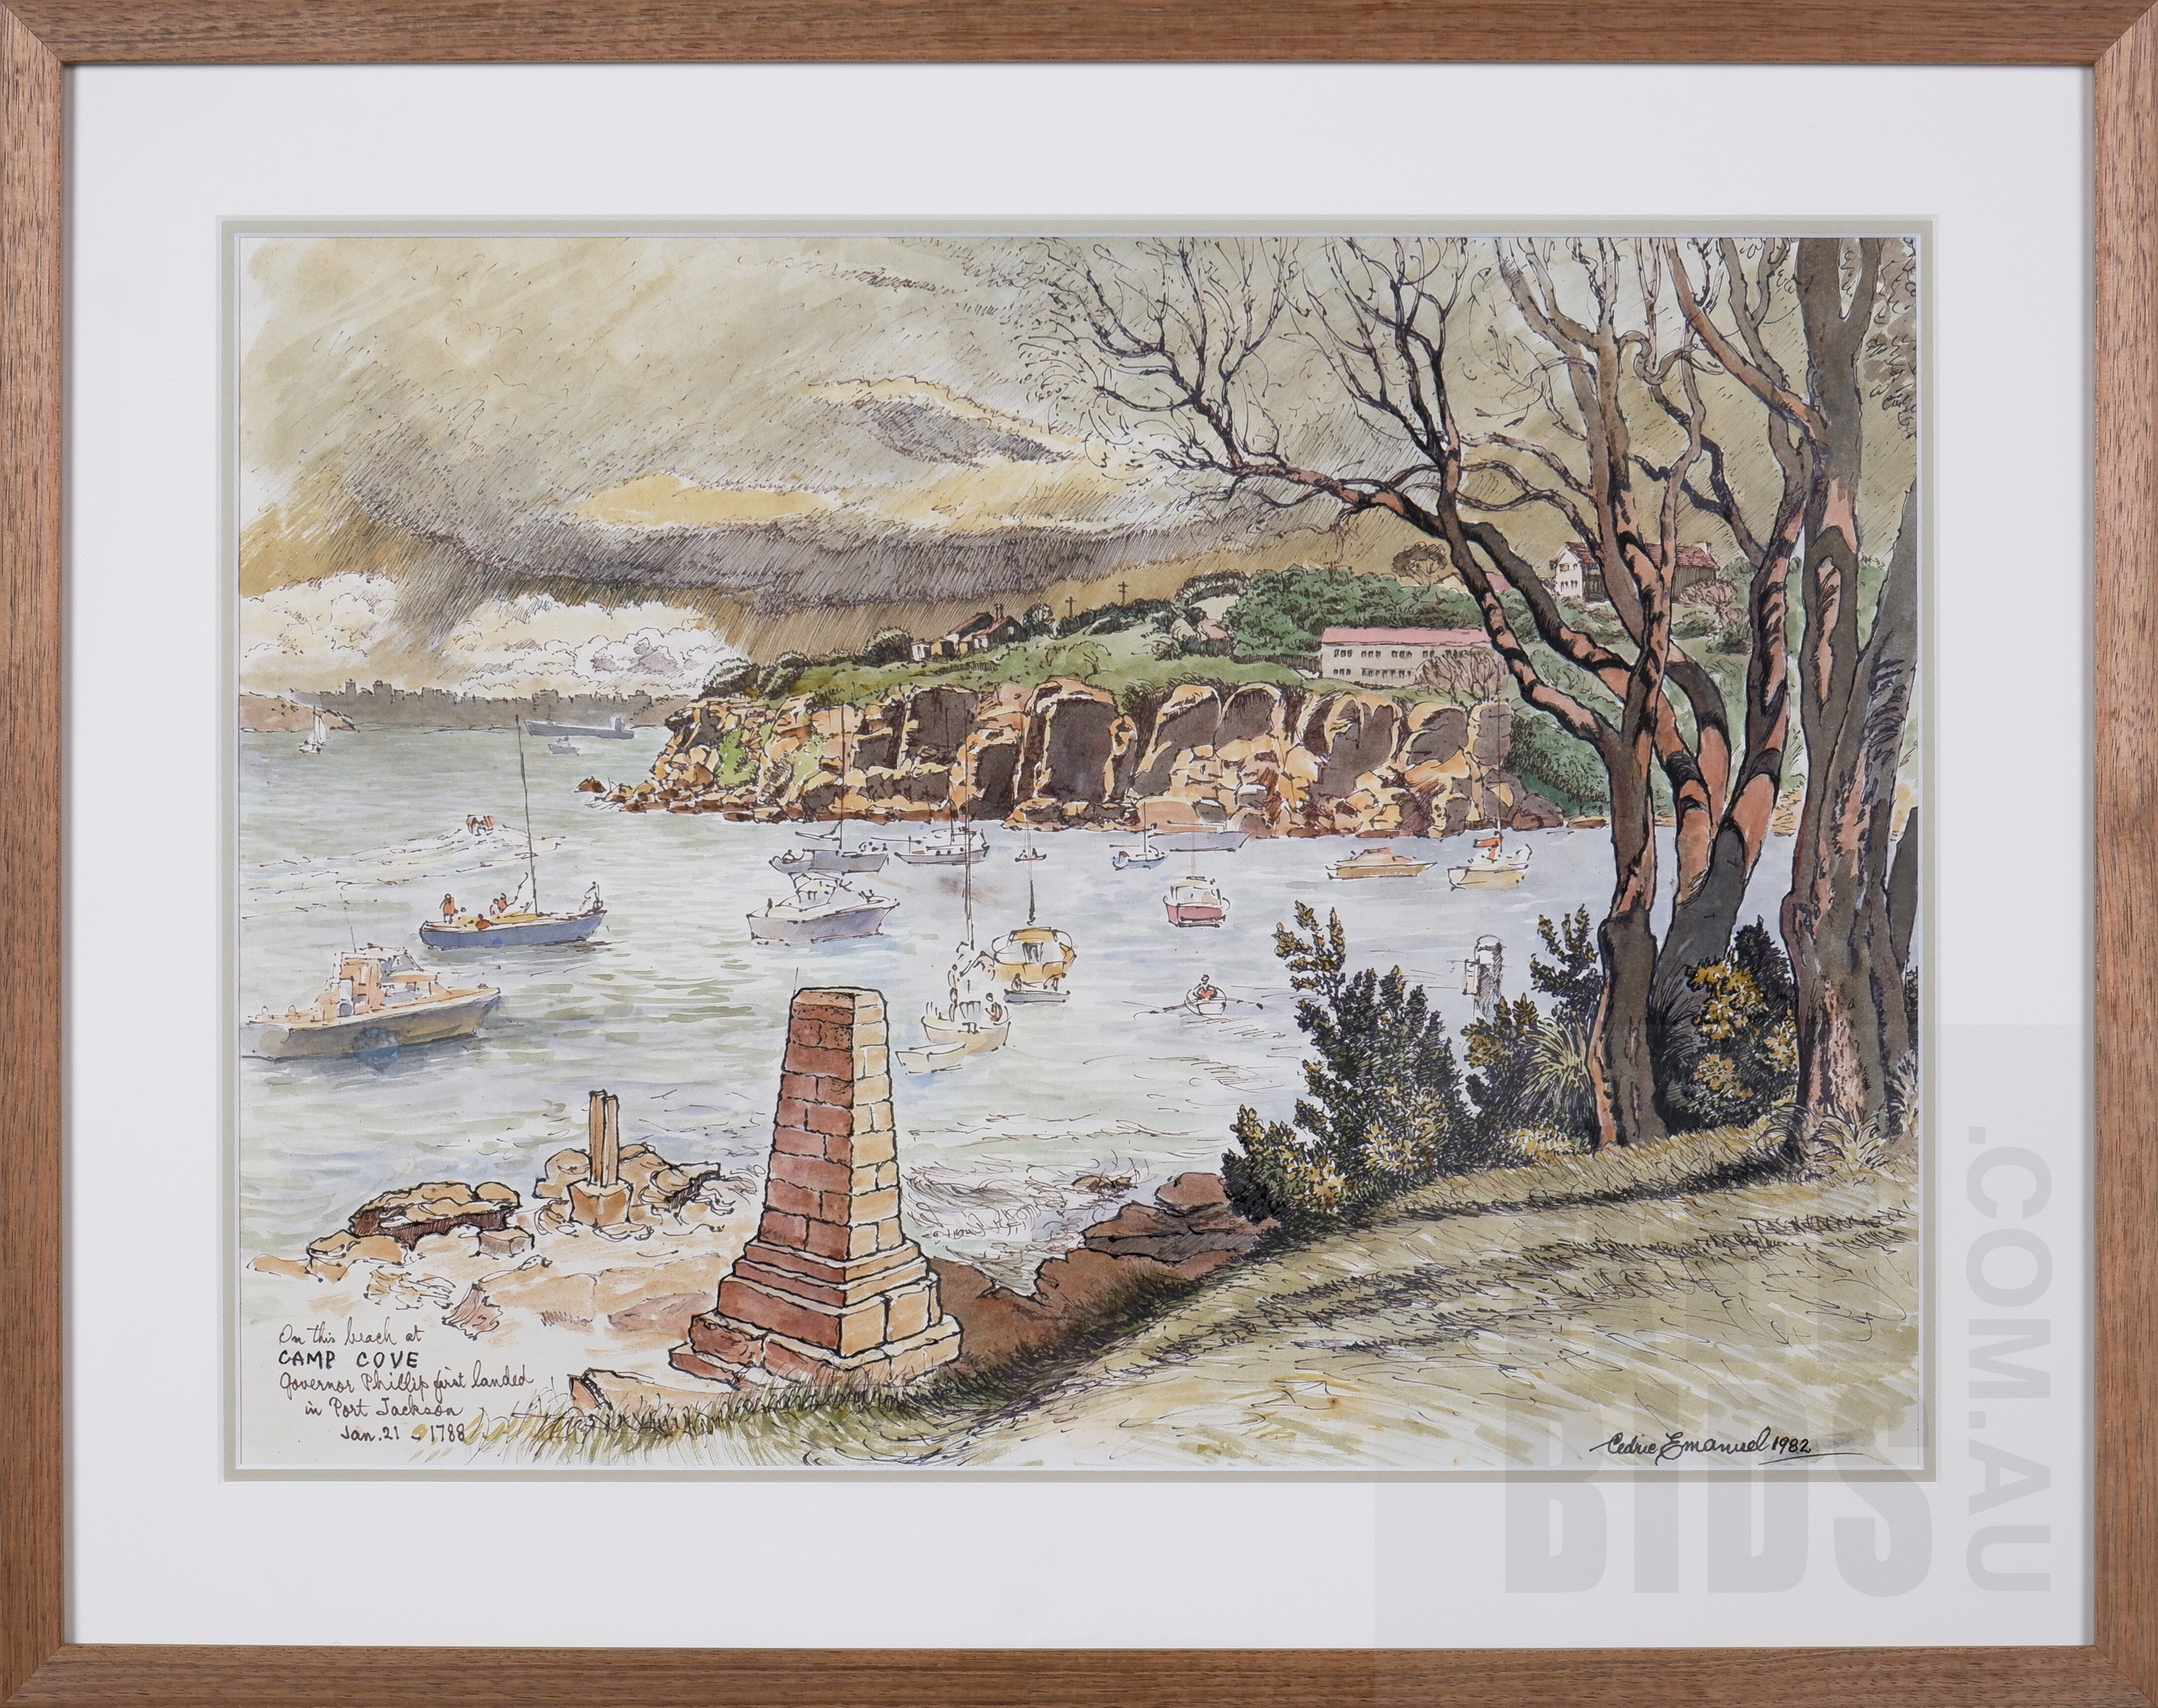 'Cedric Emanuel (1906-1995), Stormy Weather - Camp Cove Watsons Bay, Sydney Harbour 1982, Watercolour, Ink & Charcoal, 36 x 48cm'